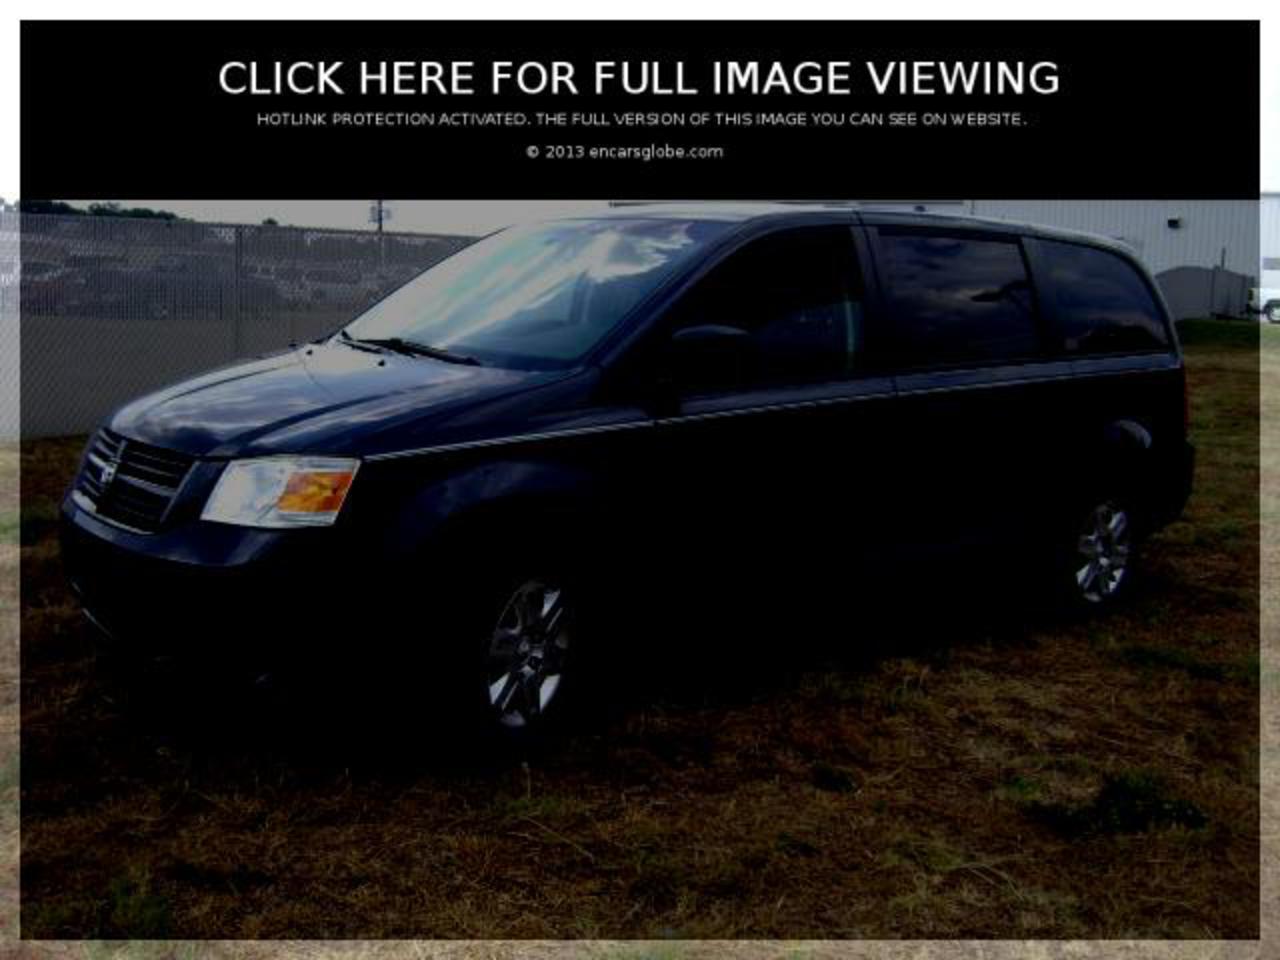 Dodge Grand Caravan SE 38 Photo Gallery: Photo #05 out of 10 ...